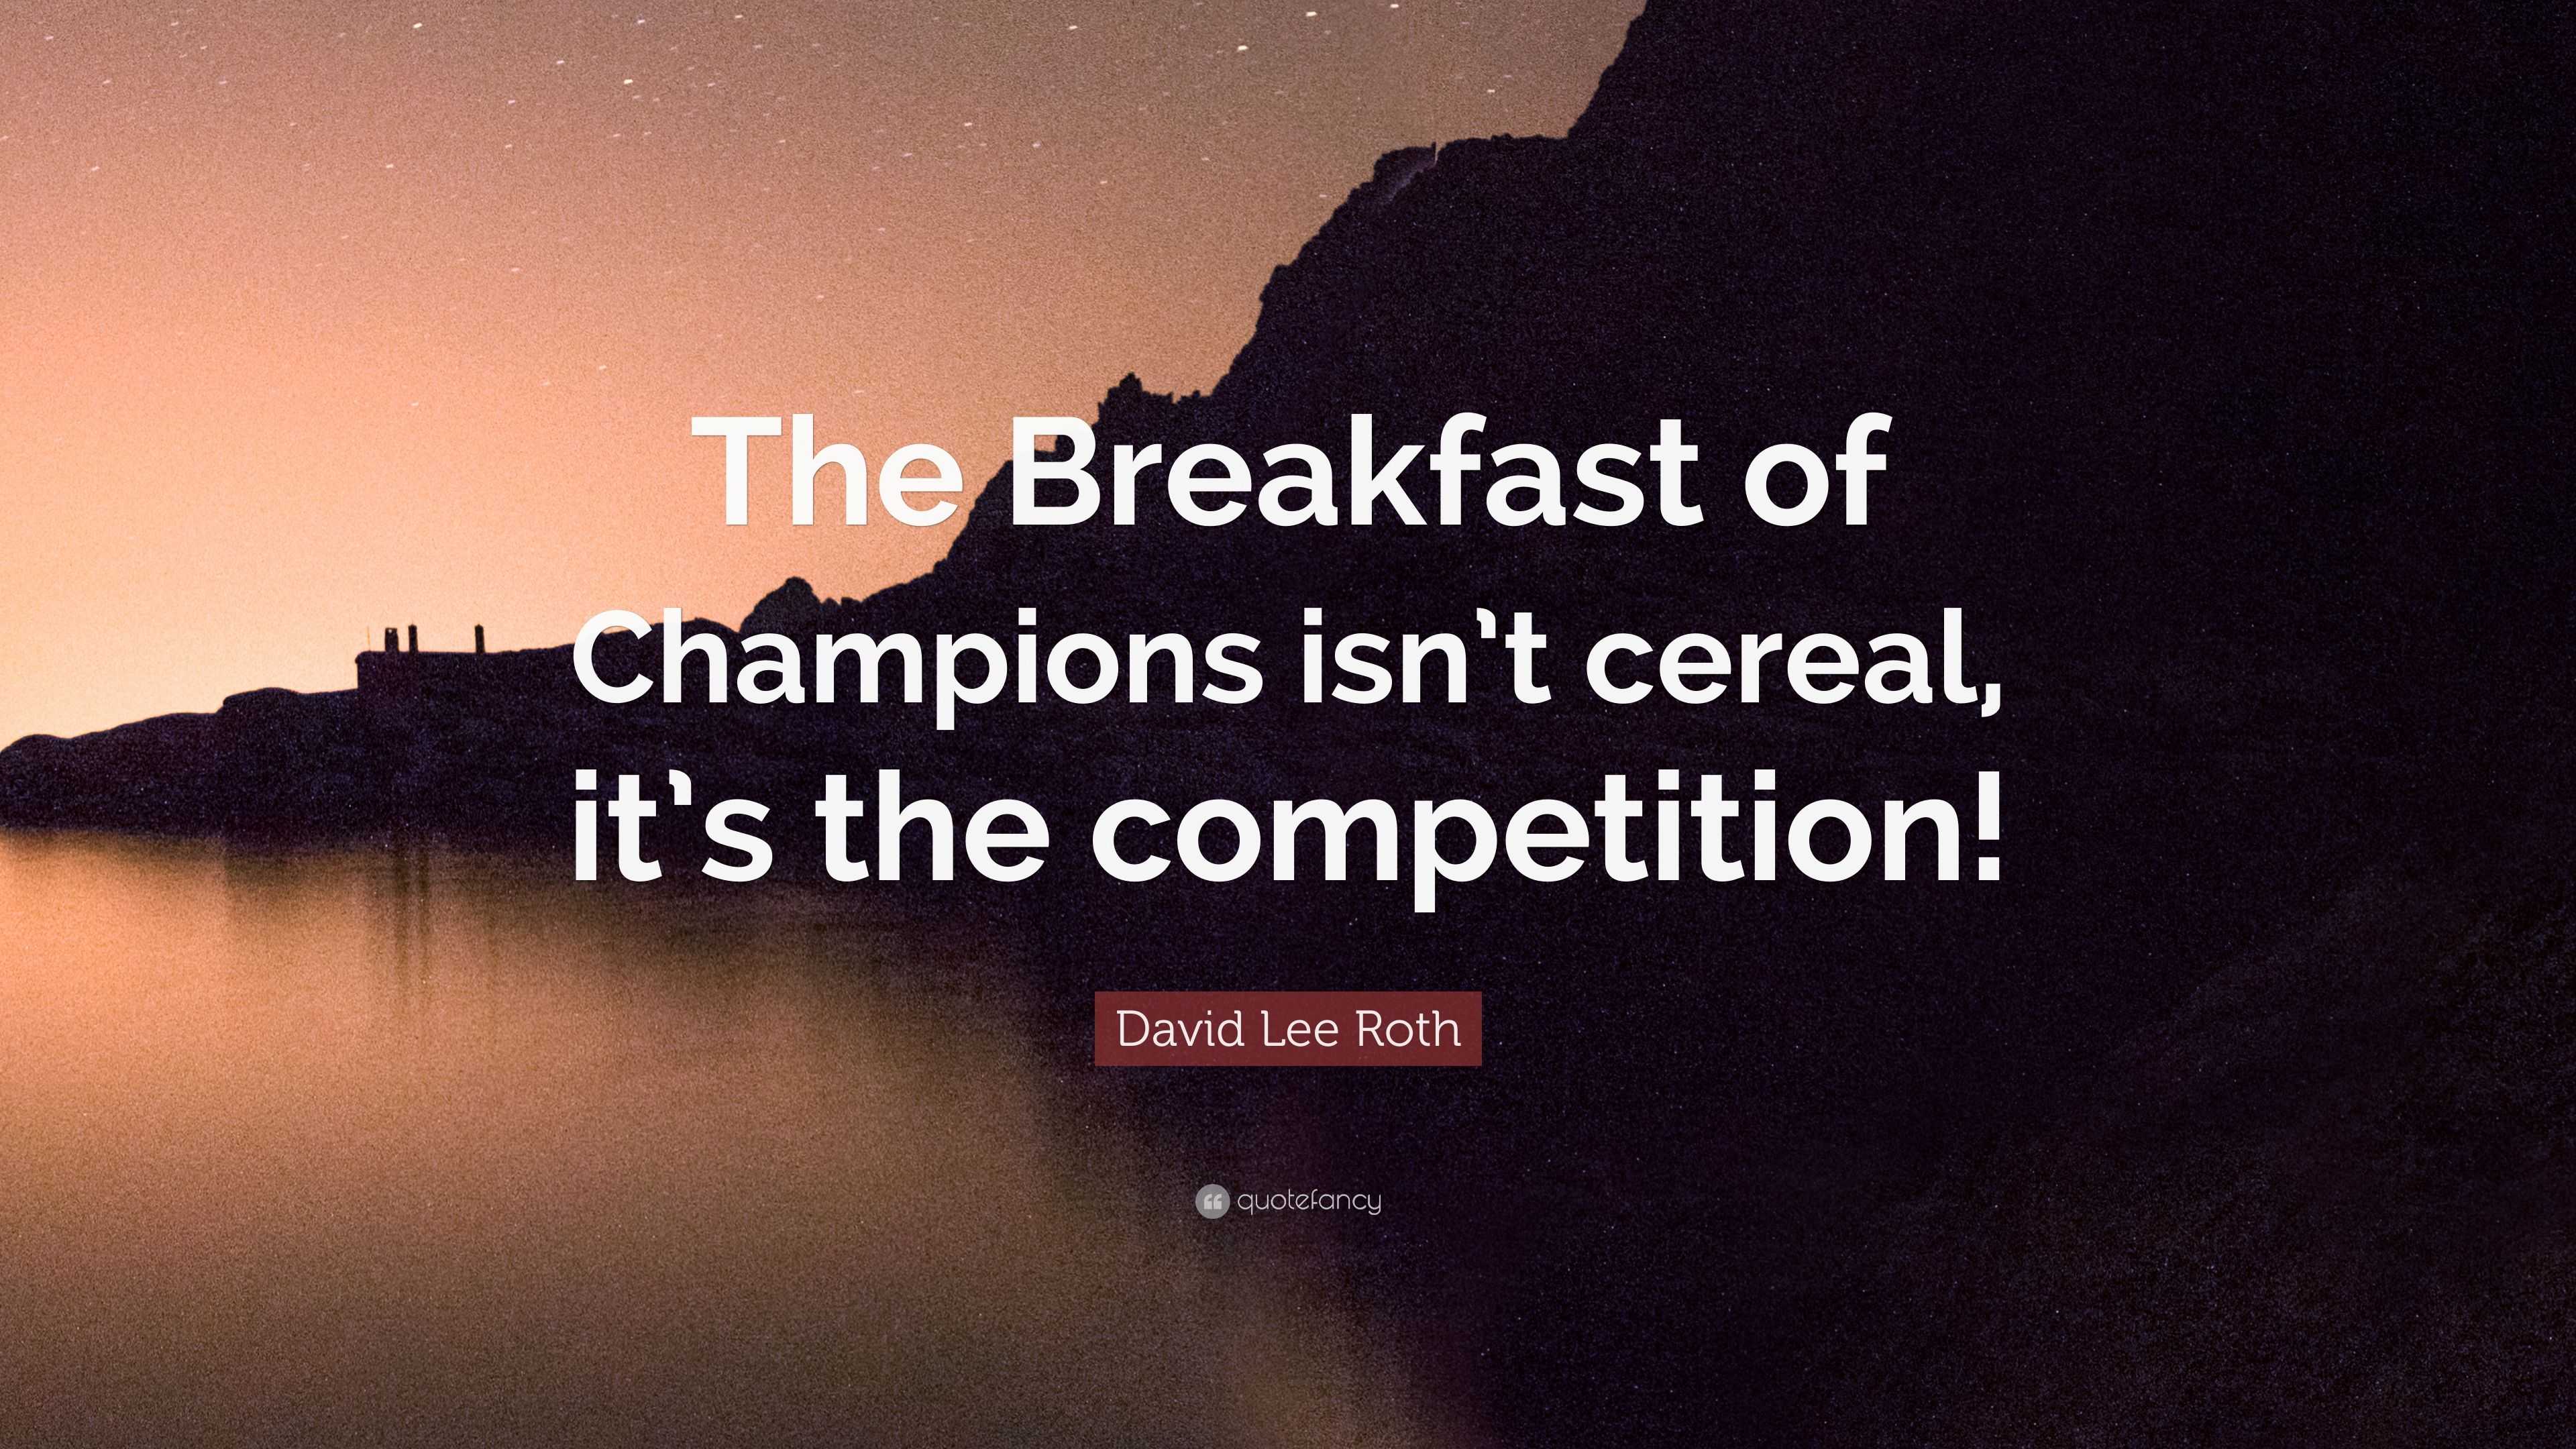 David Lee Roth Quote: “The Breakfast of Champions isn’t cereal, it’s ...